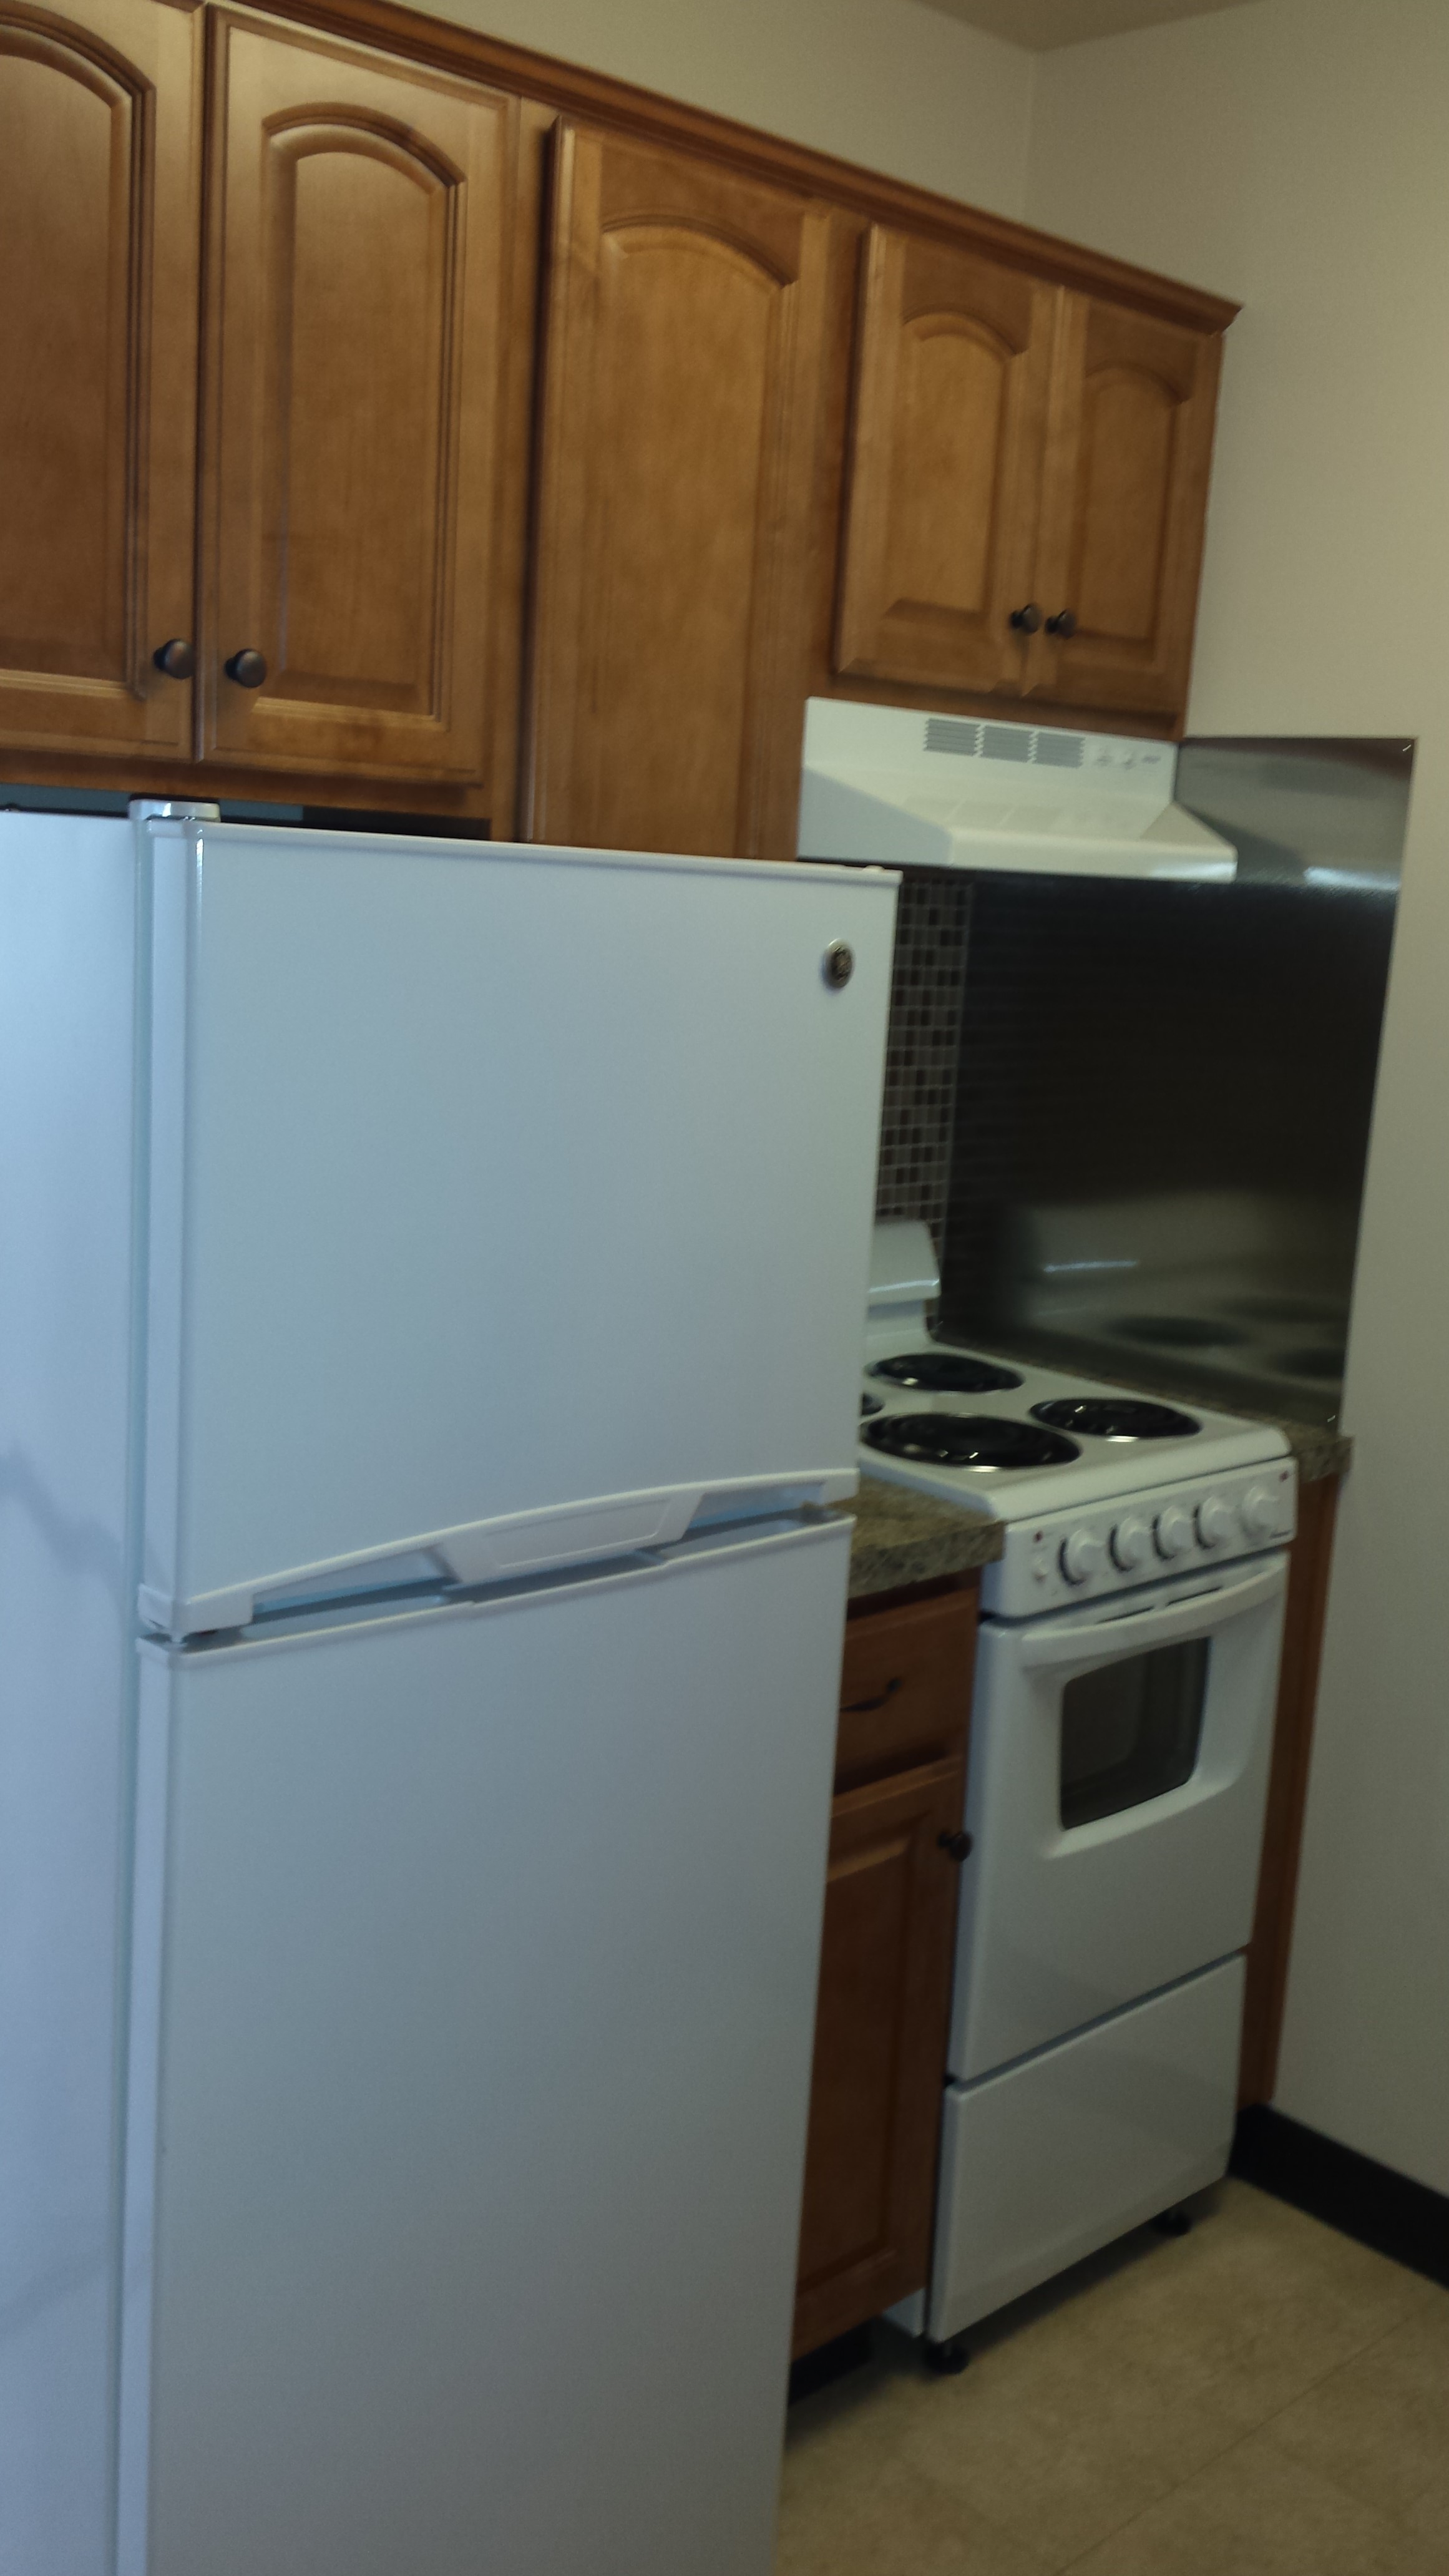 Senior One Bedroom Apartment Kitchen Stove and Refrigerator